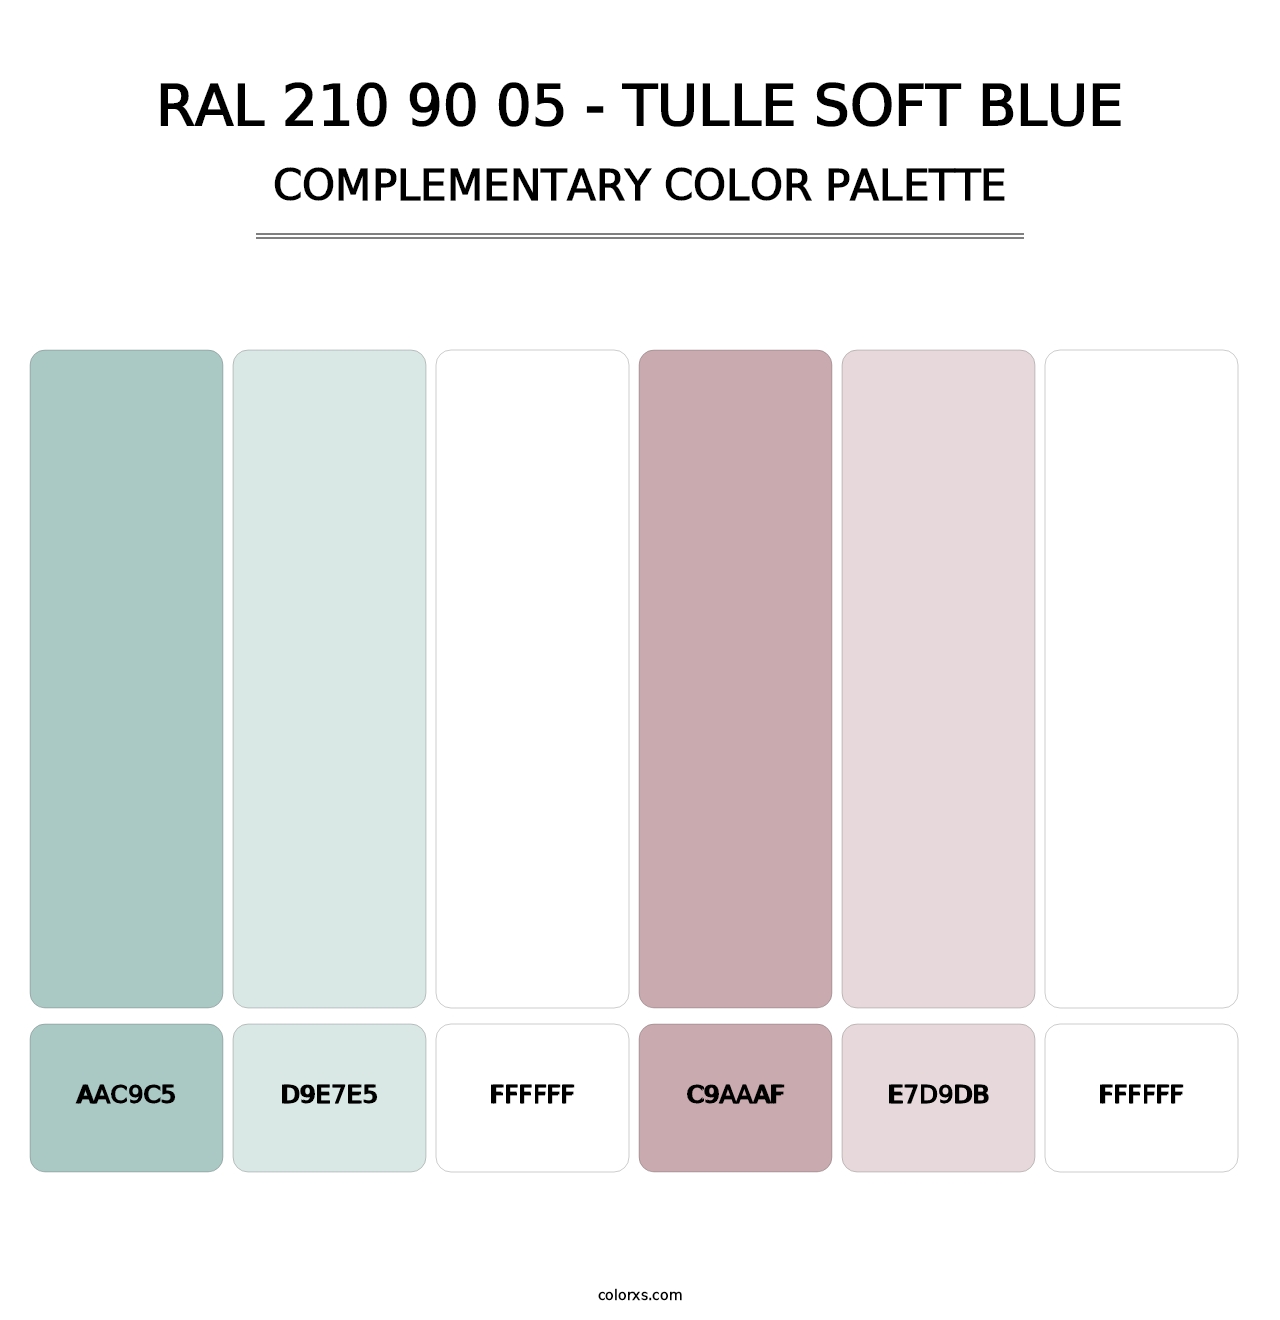 RAL 210 90 05 - Tulle Soft Blue - Complementary Color Palette